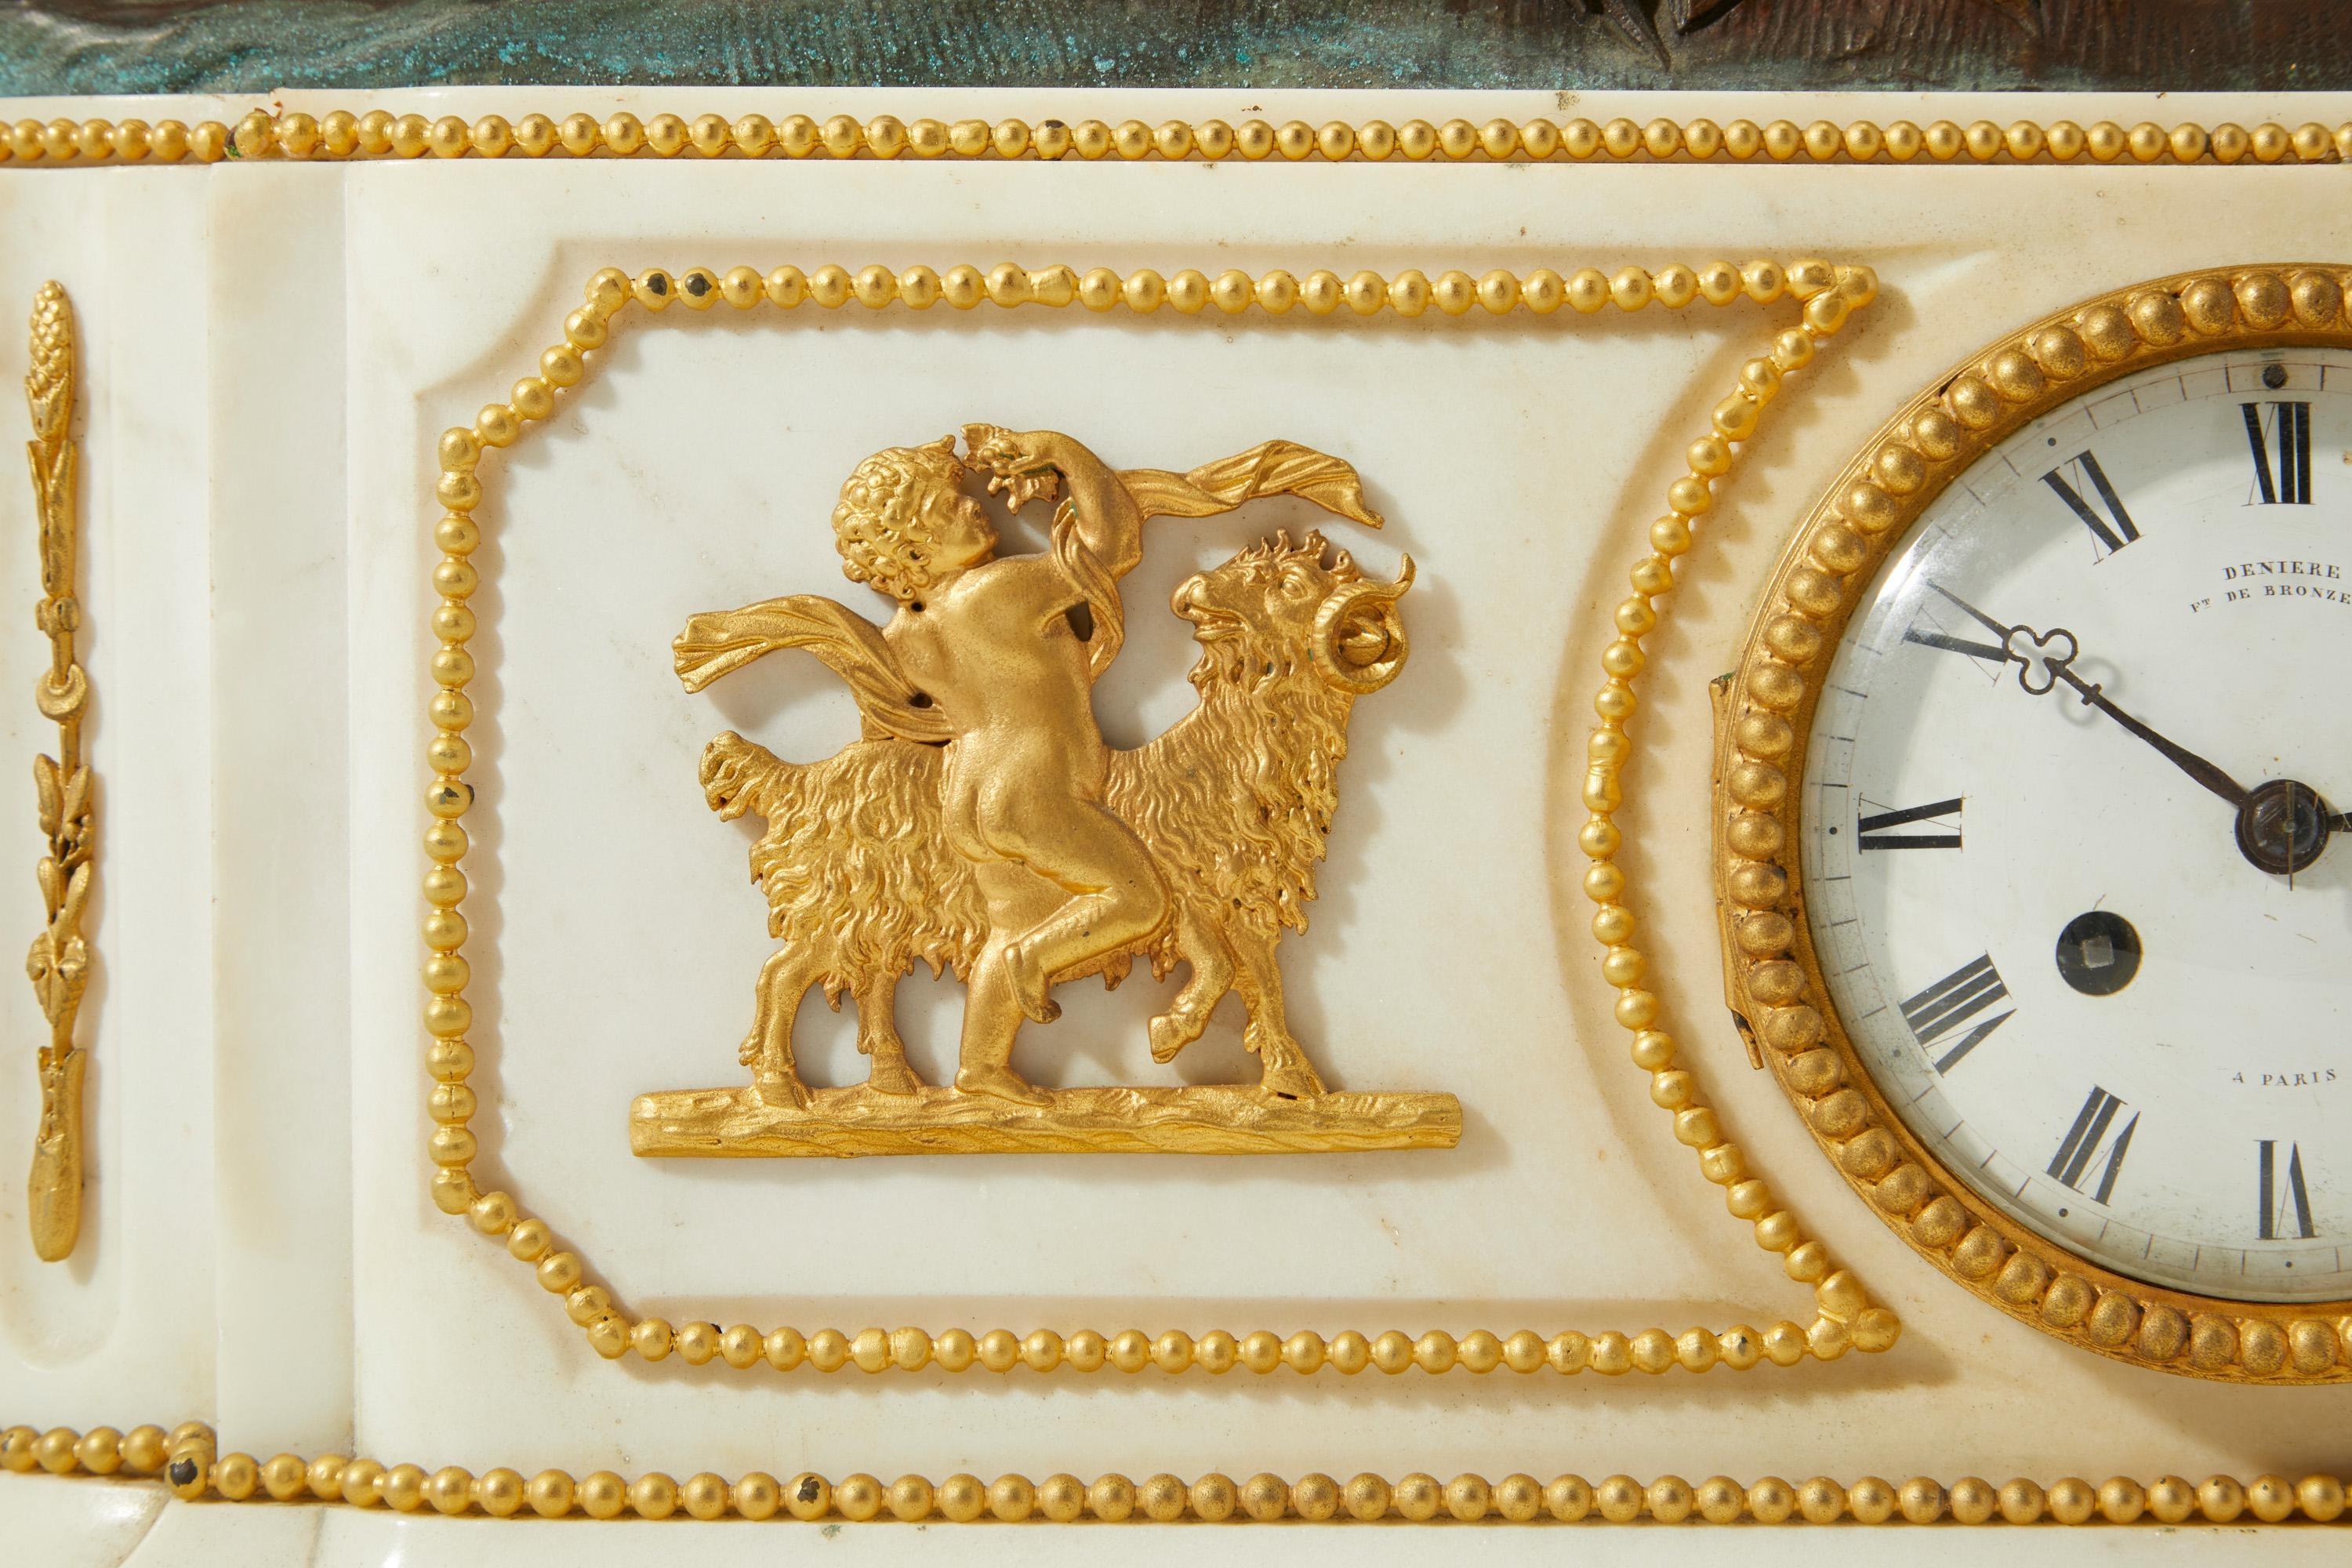 Deniere signed dial Comprising of a white marble and gilt bronze clock set and two putti candelabra.